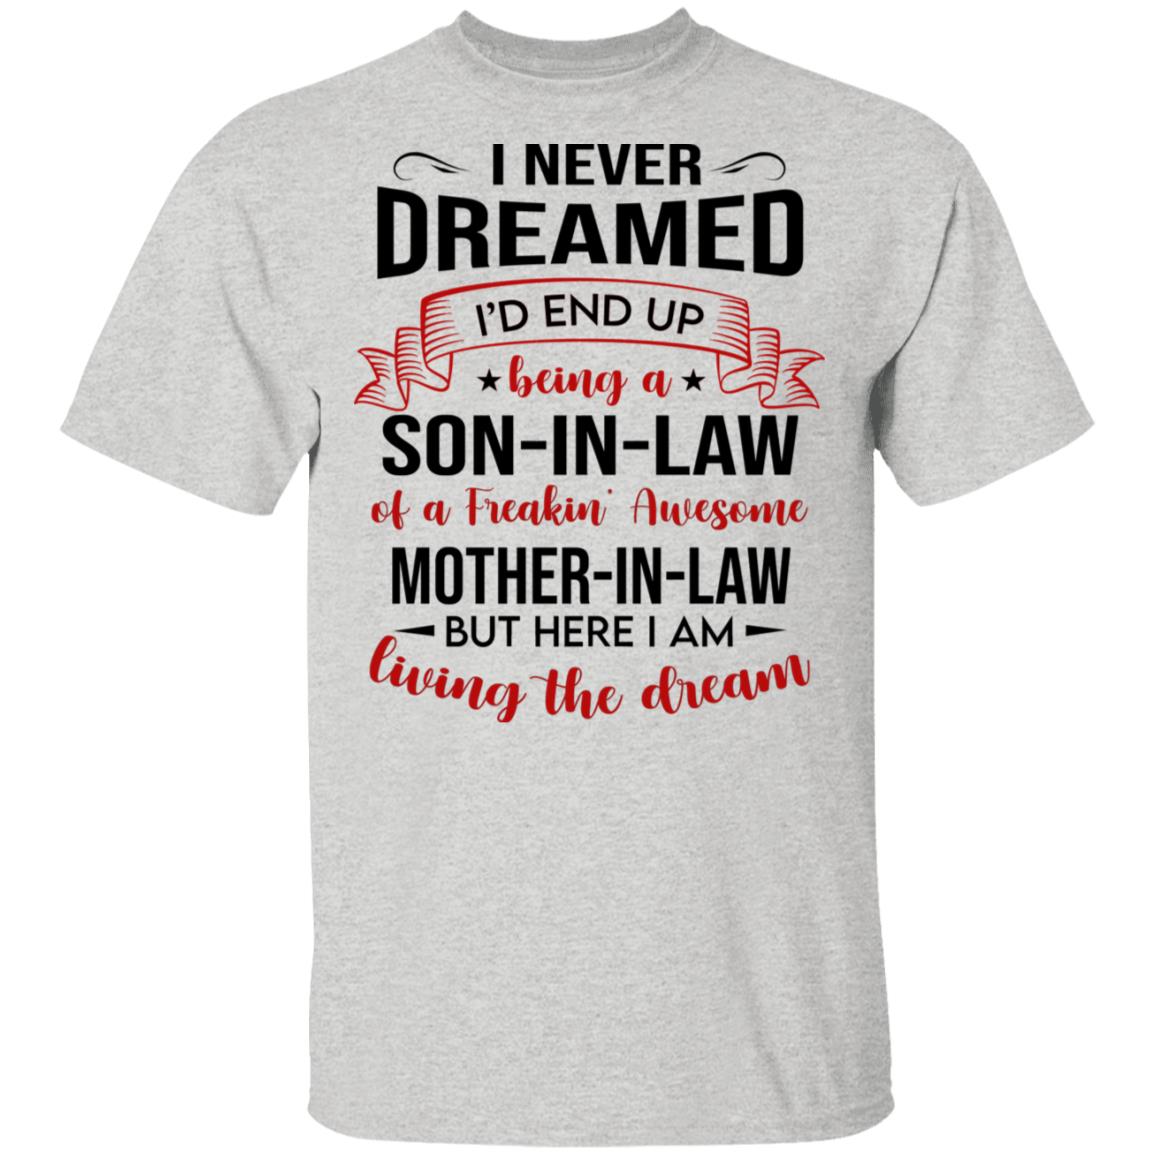 Awesome Mother In Law T-Shirt I Never Dreamed Son In Law Of Freaking Mother In Law T-Shirt Son In Law Birthday Gift Awesome Being A Son